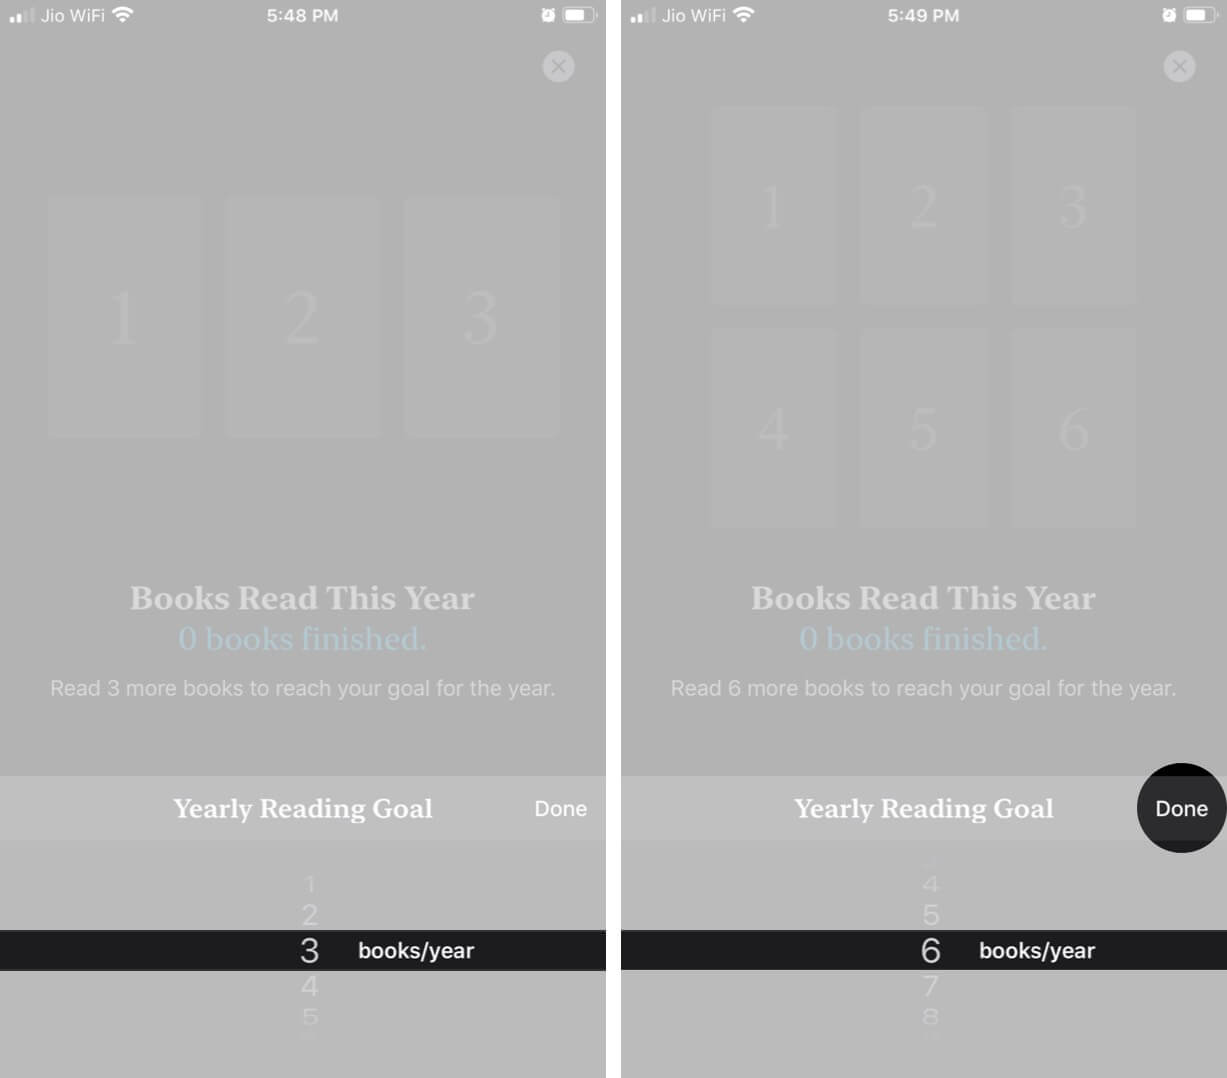 Set Yearly Reading Goals in Apple Books App on iPhone